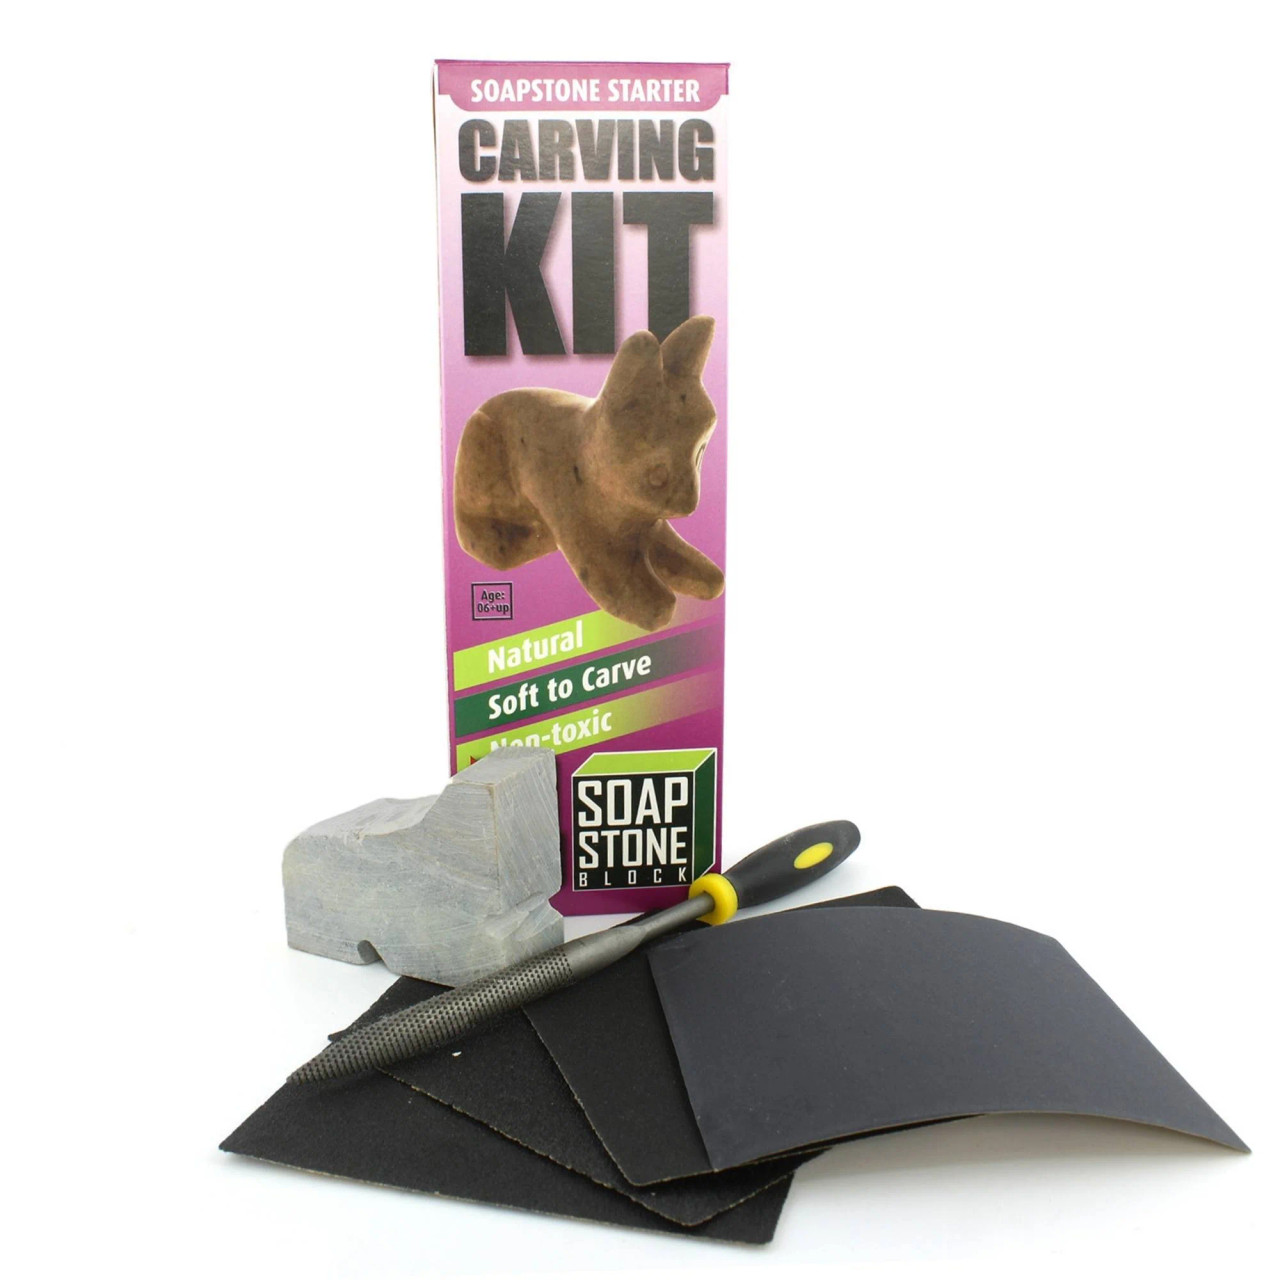 Dropship Cat Soapstone Carving Kit: Safe And Fun DIY Craft For